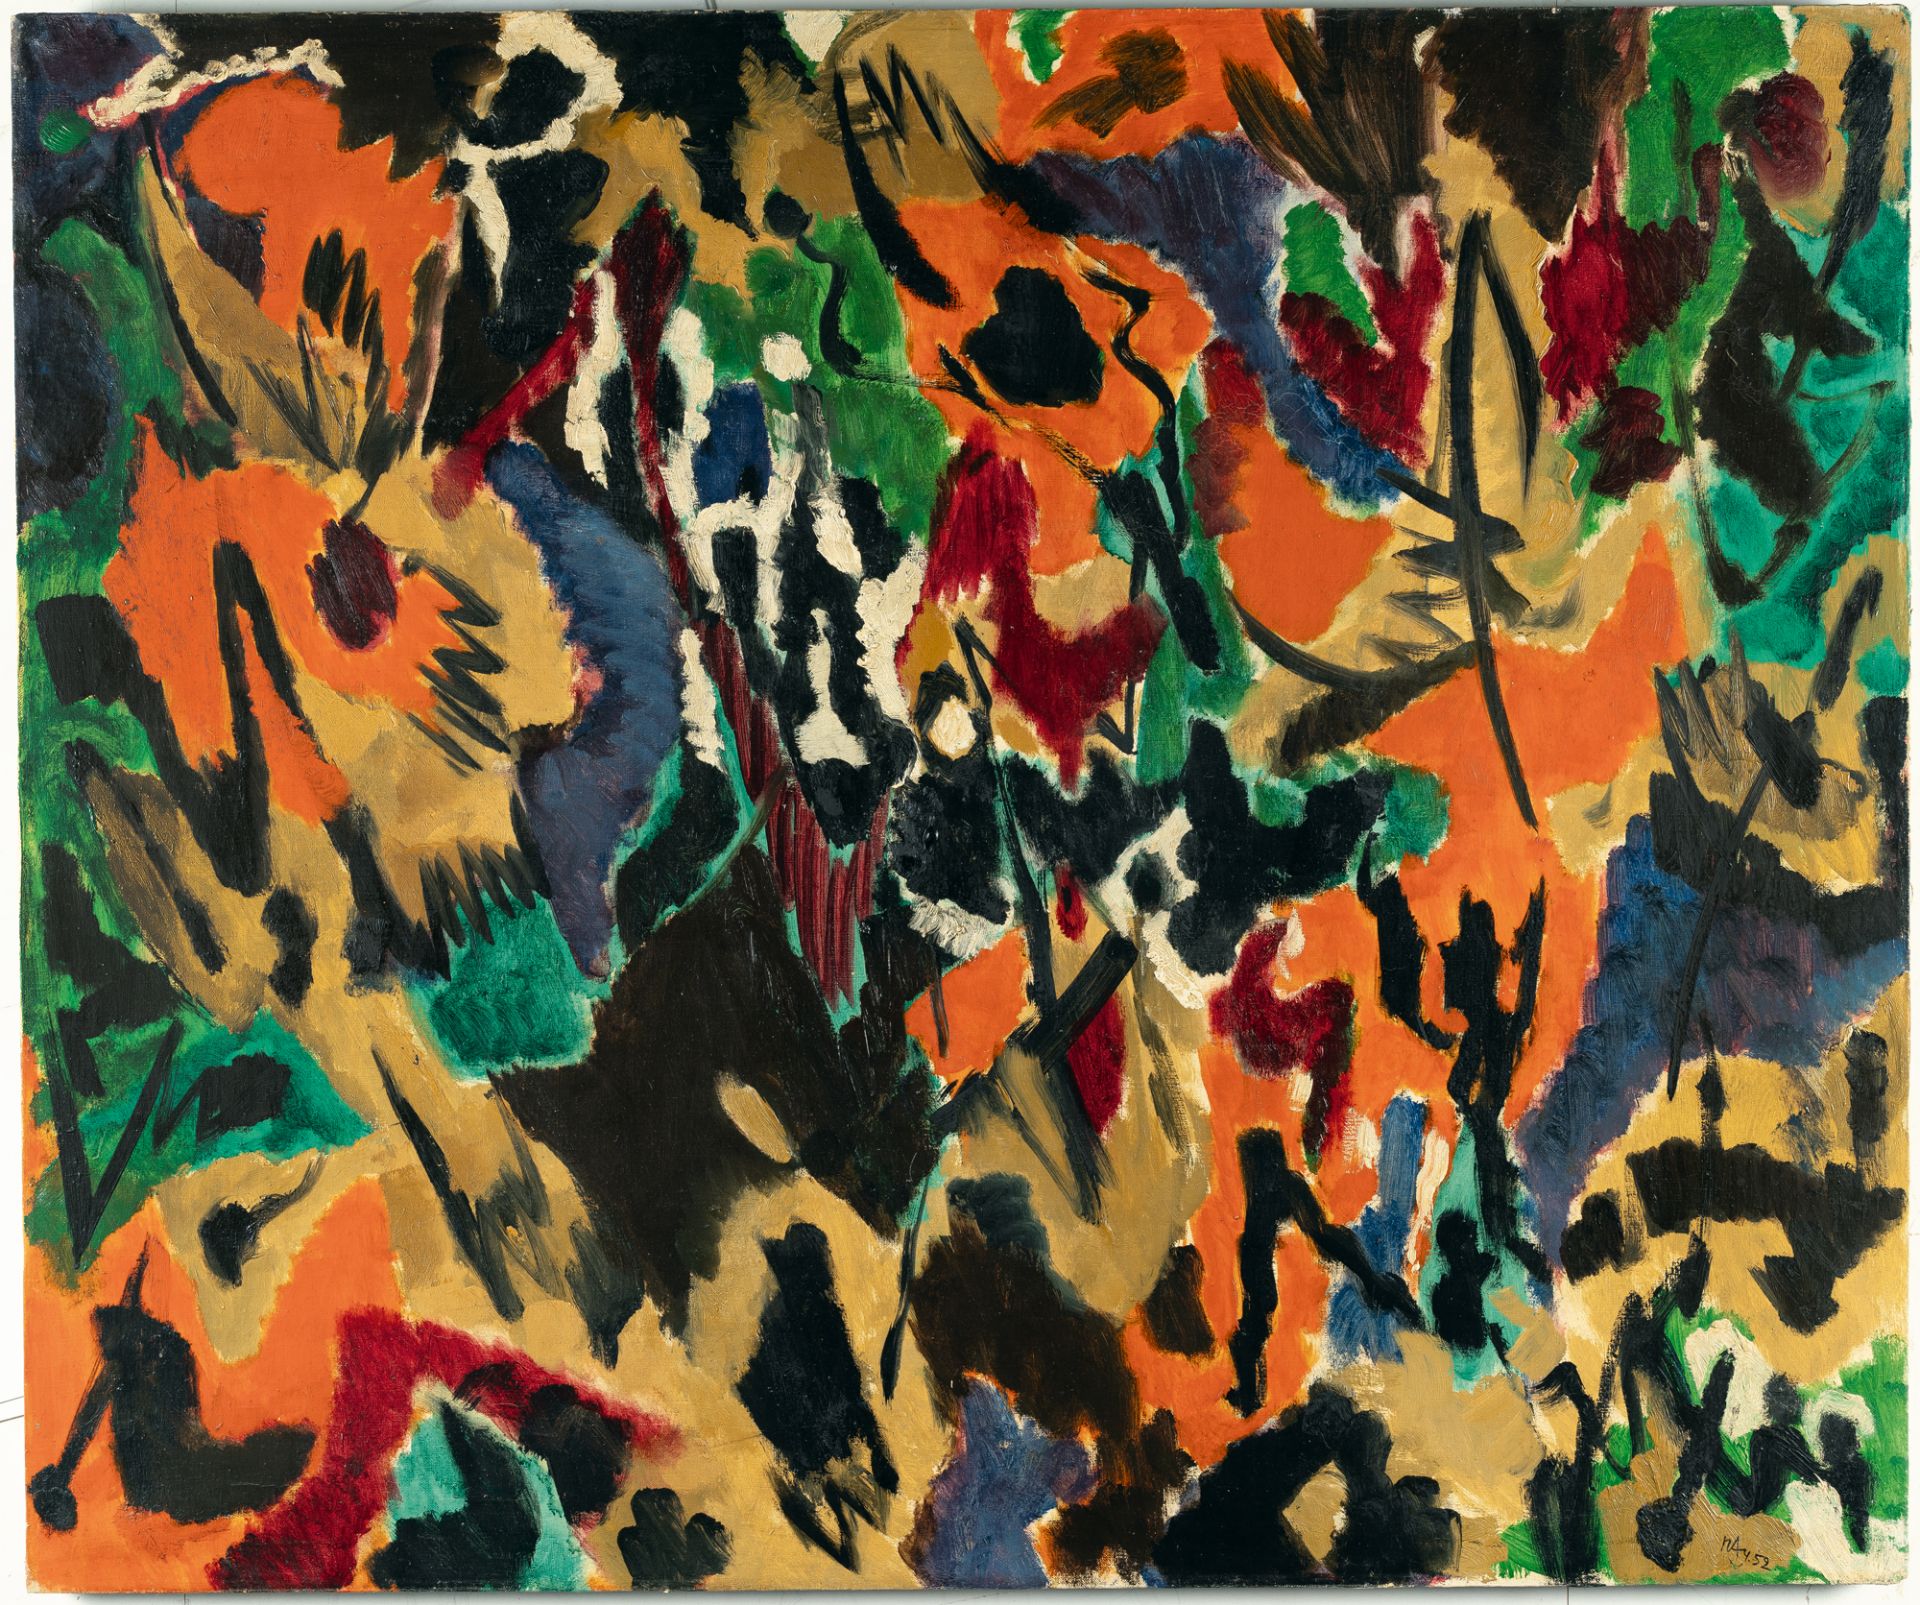 Ernst Wilhelm Nay, Orange mercurial.Oil on canvas. (19)52. Ca. 100 x 119.5 cm. Signed and dated - Image 4 of 4